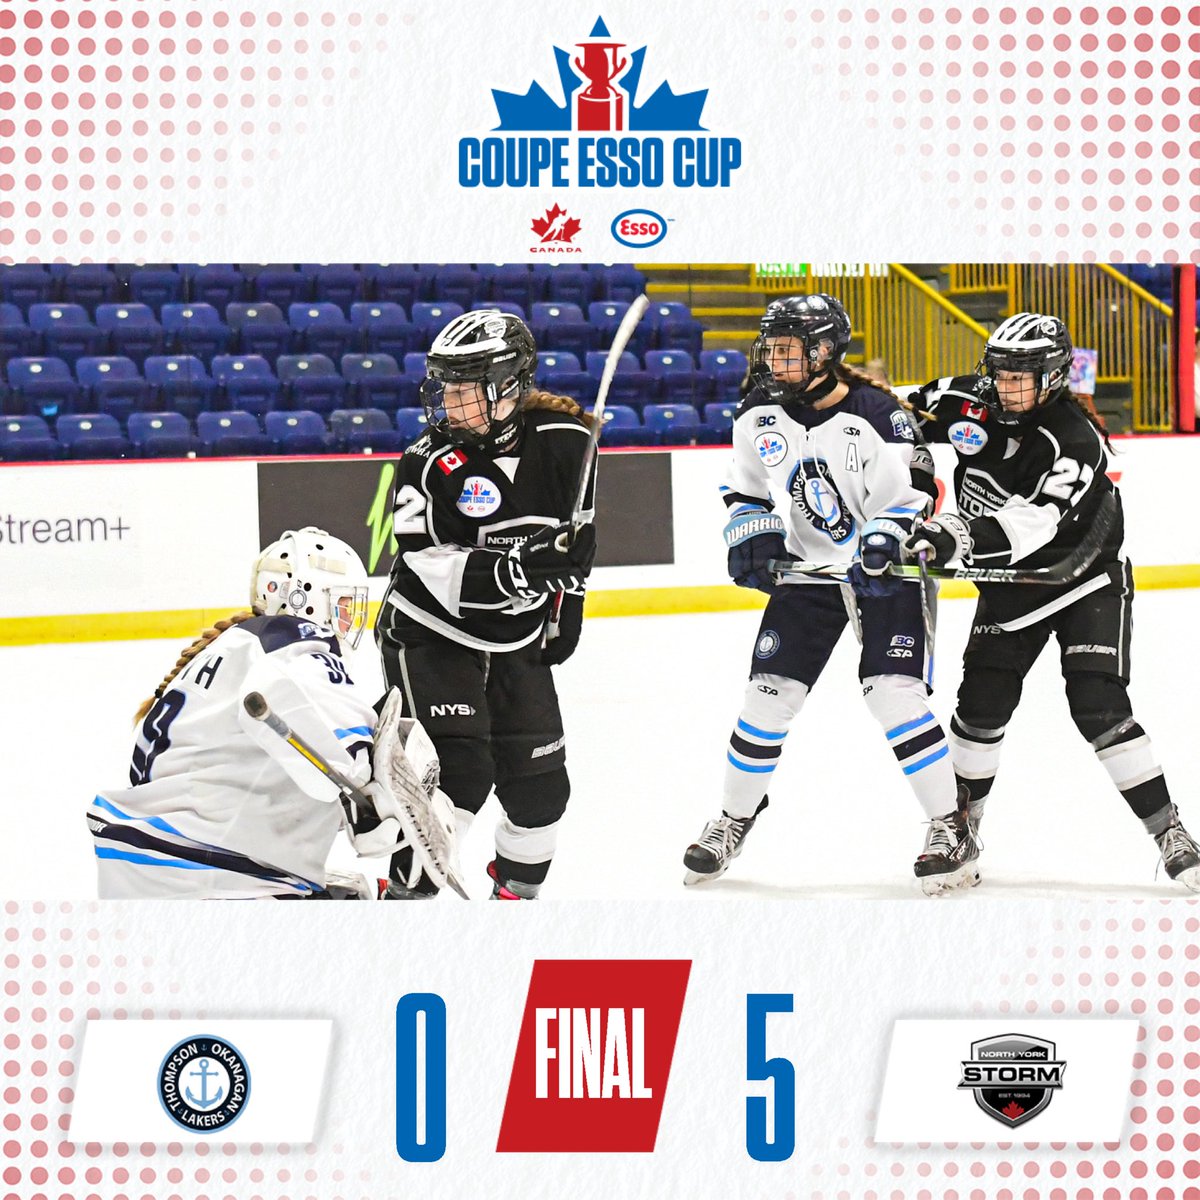 GAME OVER! Brigitte Armatys makes 25 saves as the @nyshockey shut out the @tolakers_aaa.   MATCH FINI! Brigitte Armatys fait 25 arrêts, et le @nyshockey blanchit les @tolakers_aaa.   📊 hc.hockey/EssoStats2408 📊 hc.hockey/StatsEsso2408   #EssoCup | #CoupeEsso | @ImperialOil